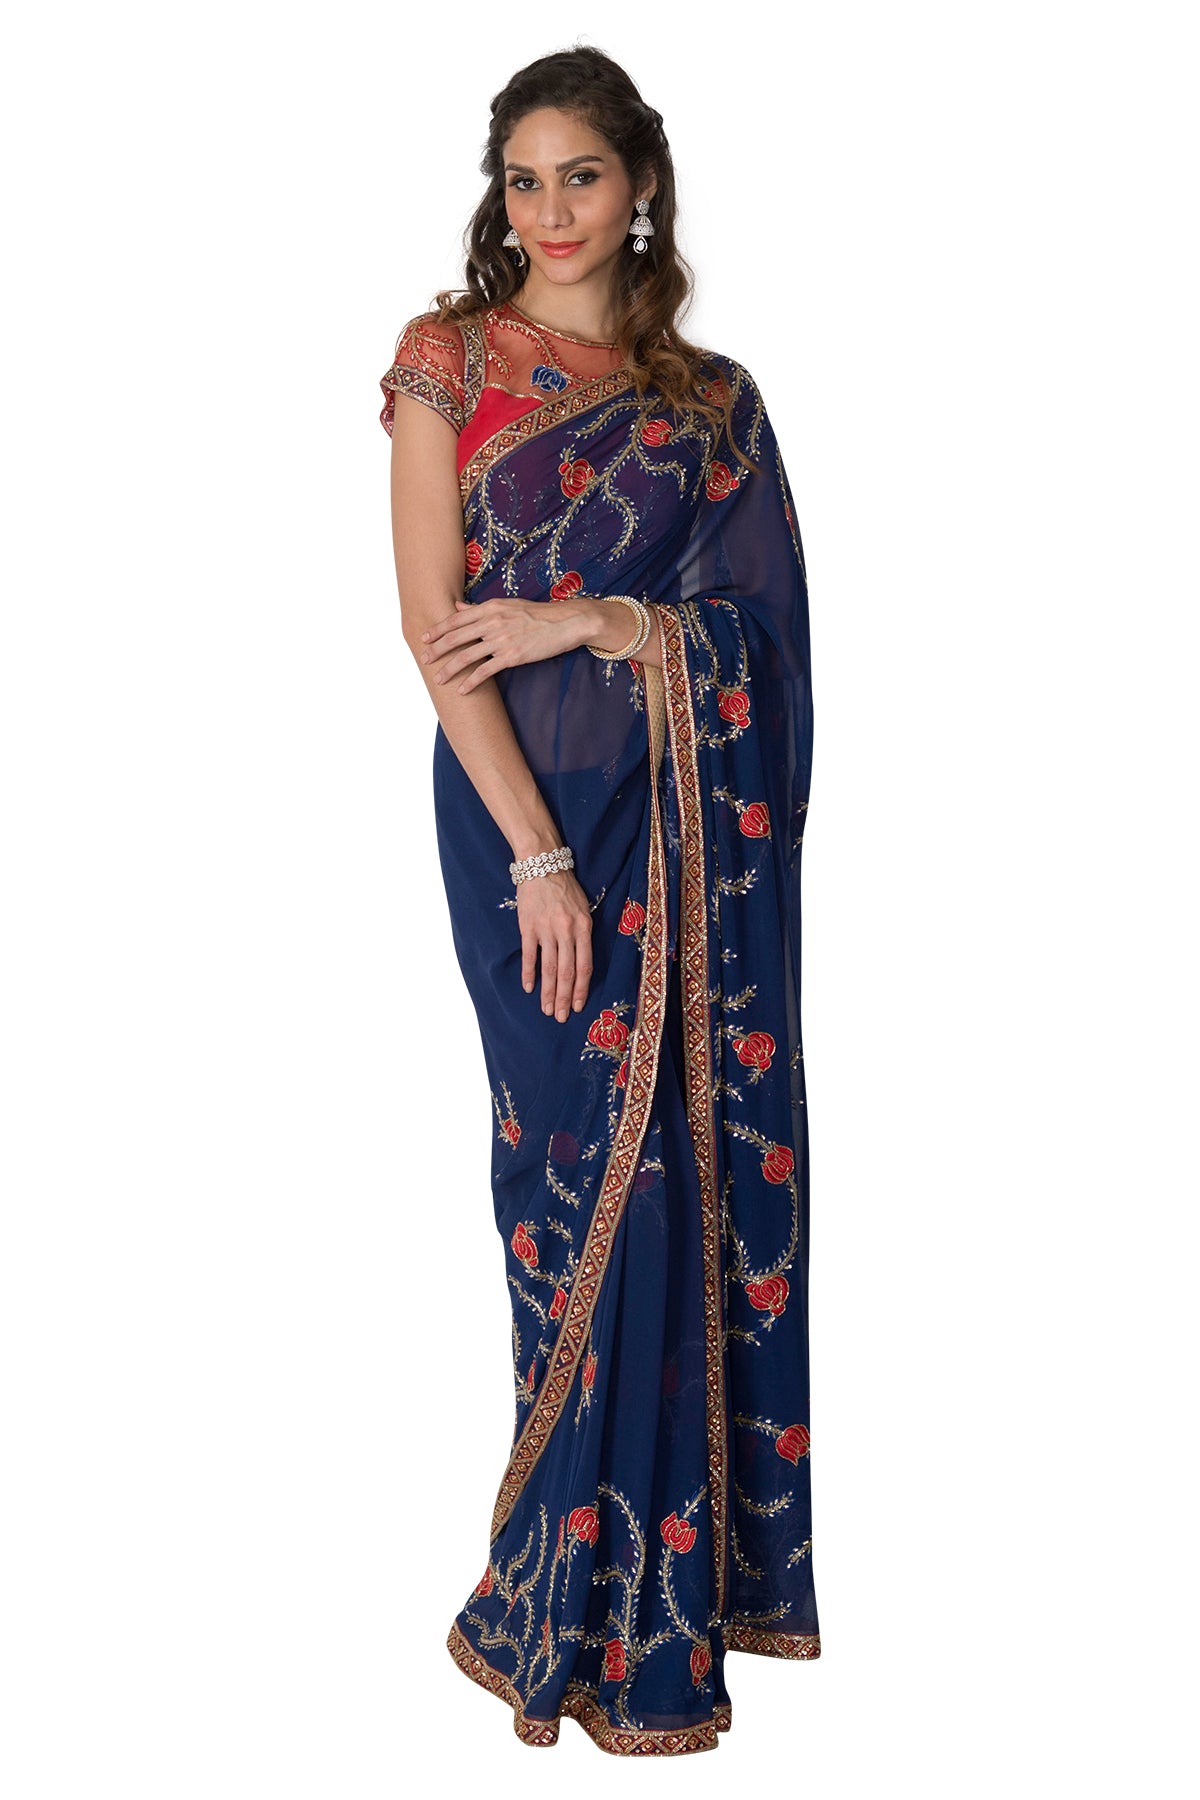 Bring on the moody blues and put on your dancing shoes in this stunning blue saree with red embroidery. Please note that the blouse and petticoat are not included.
